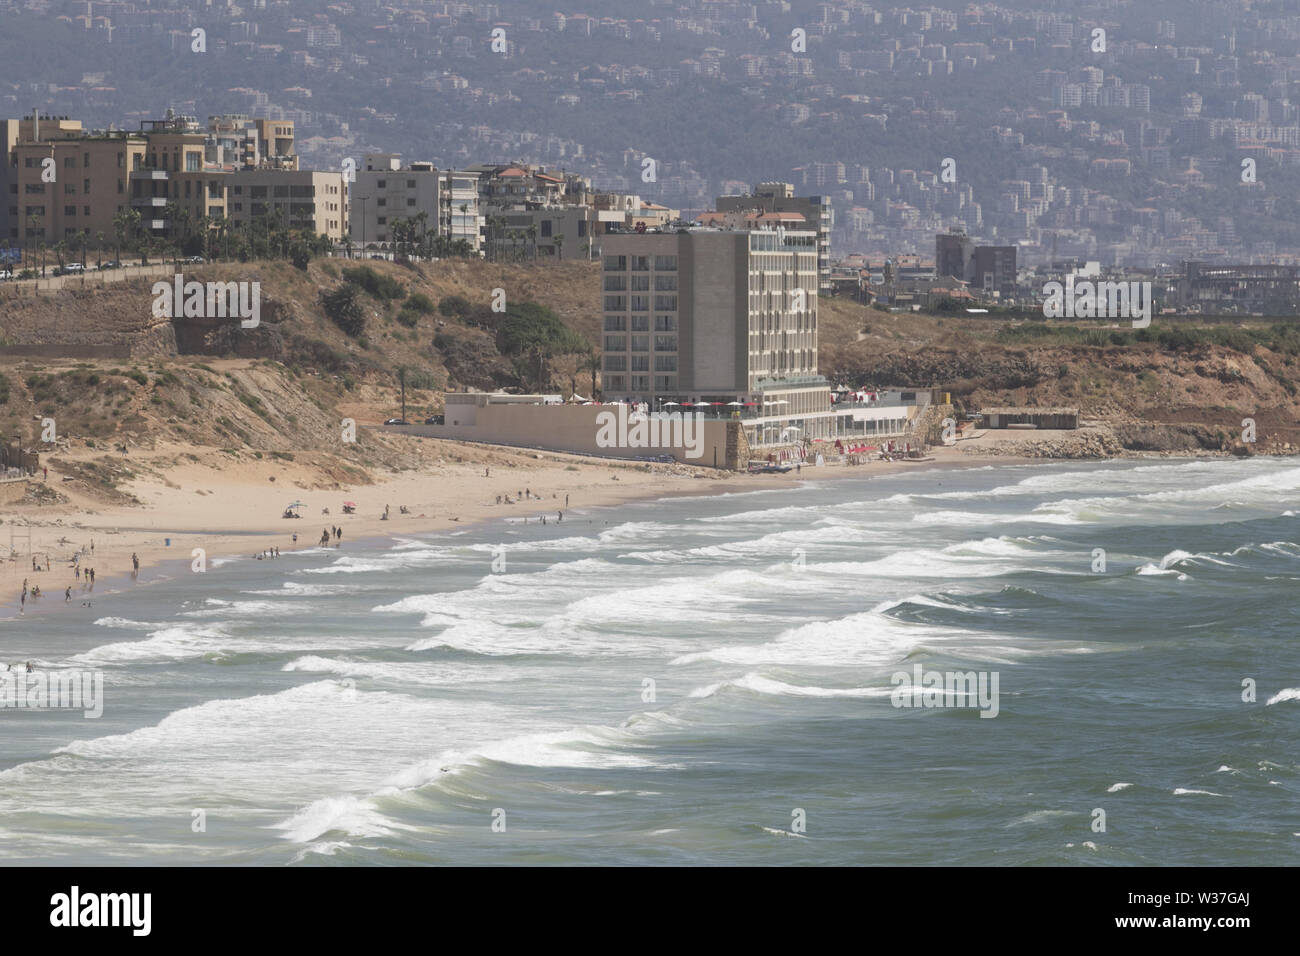 July 13, 2019 - Beirut, Lebanon - A crowded beach in West Beirut, on a hot summer day. (Credit Image: © Amer Ghazzal/SOPA Images via ZUMA Wire) Stock Photo